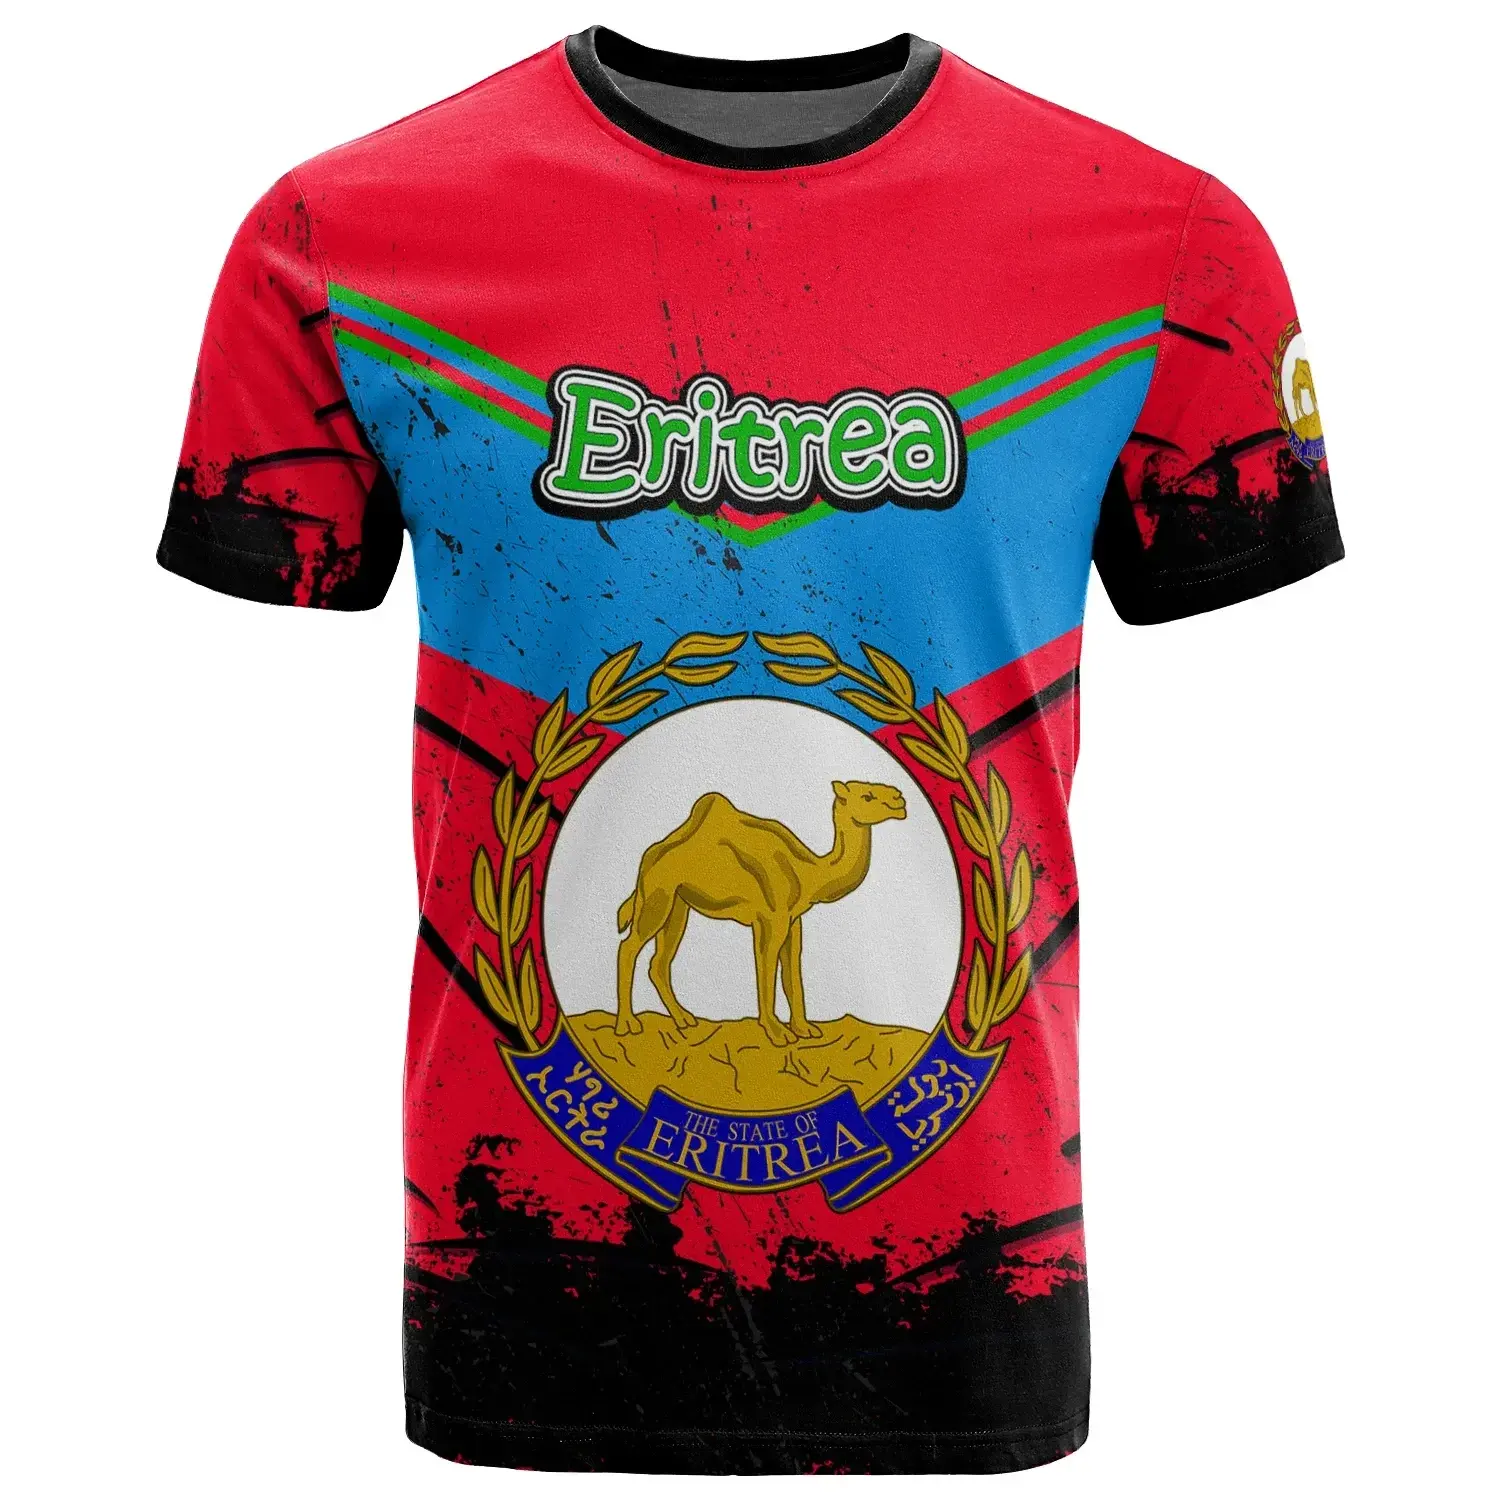 Wholesale Price Africa Zone Clothing Short Sleeve Customize Eritrea Elements Casual Wear T-Shirt Hot Sale Breathable Male Tshirt